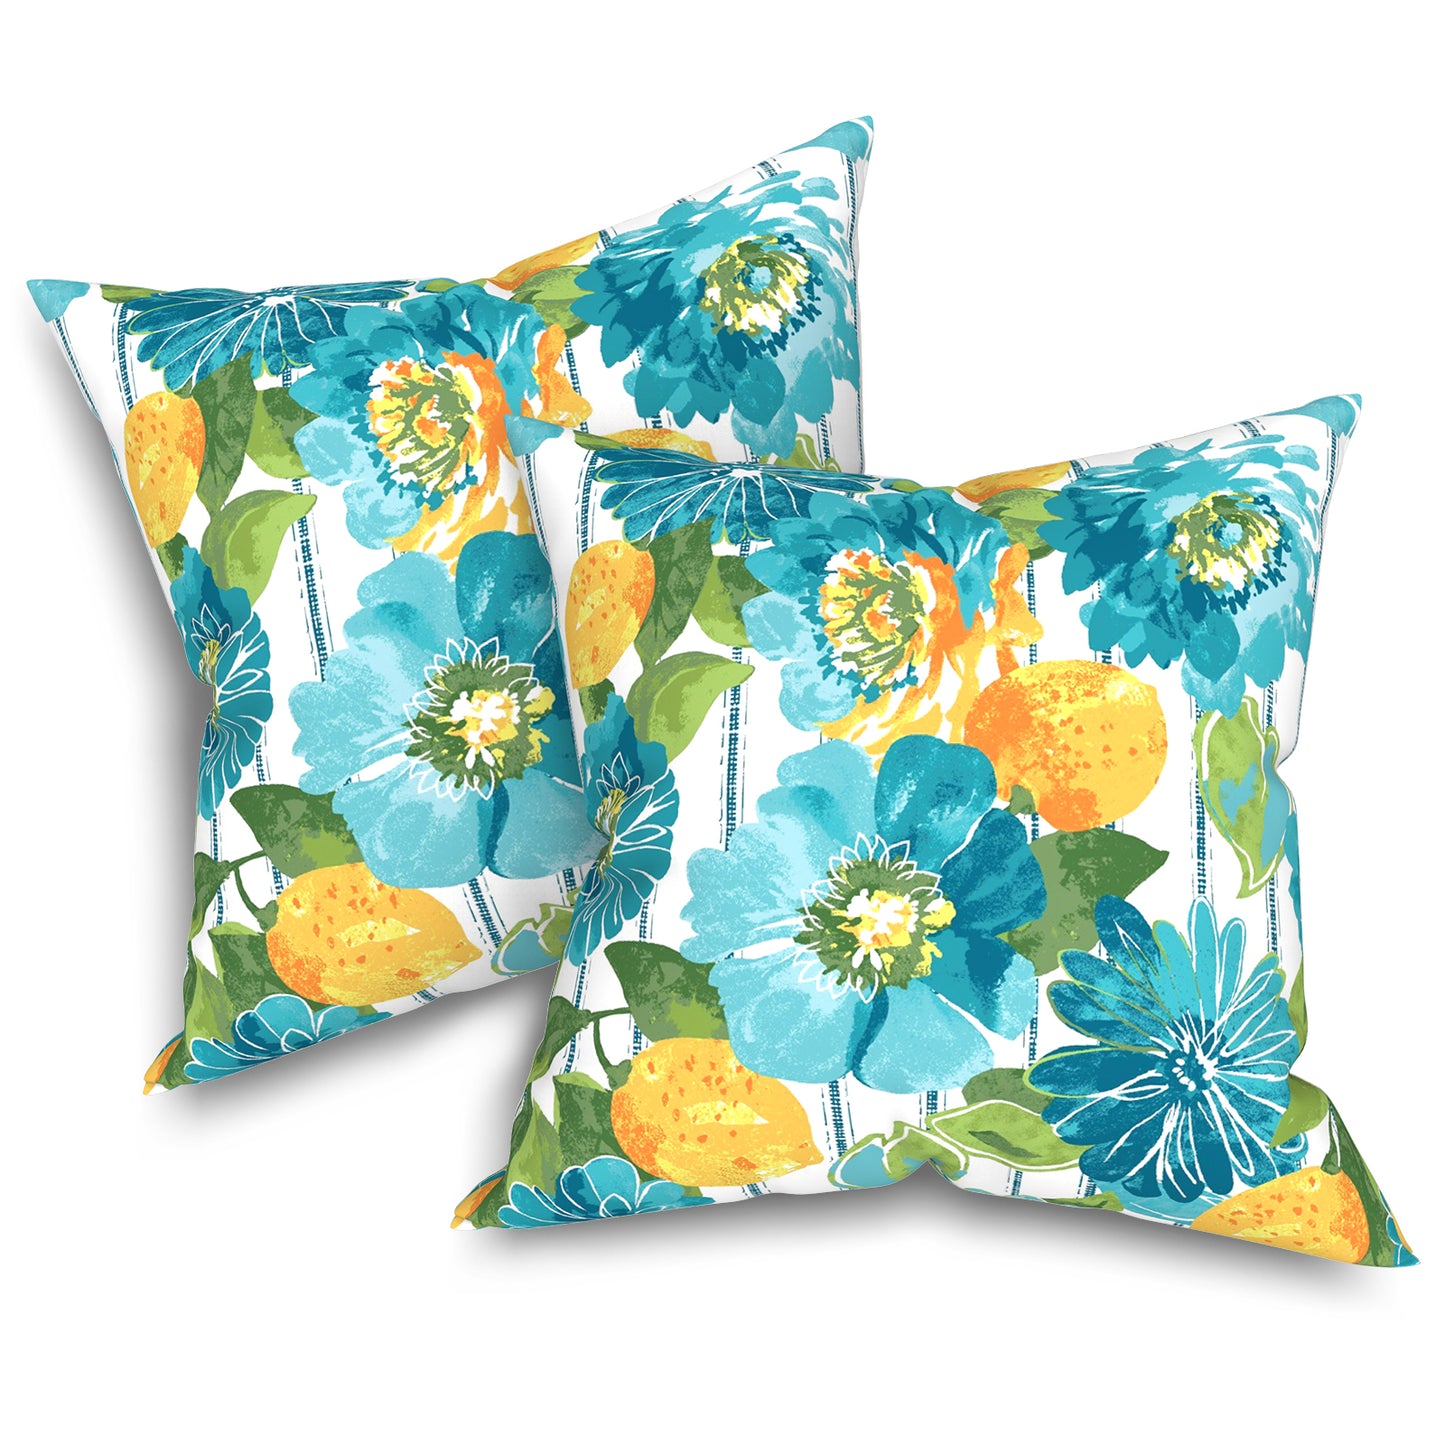 Melody Elephant Pack of 2 Patio Throw Pillow Covers ONLY, Water Repellent Cushion Cases 20x20 Inch, Square Pillowcases for Outdoor Couch Decoration, Lotus Blue